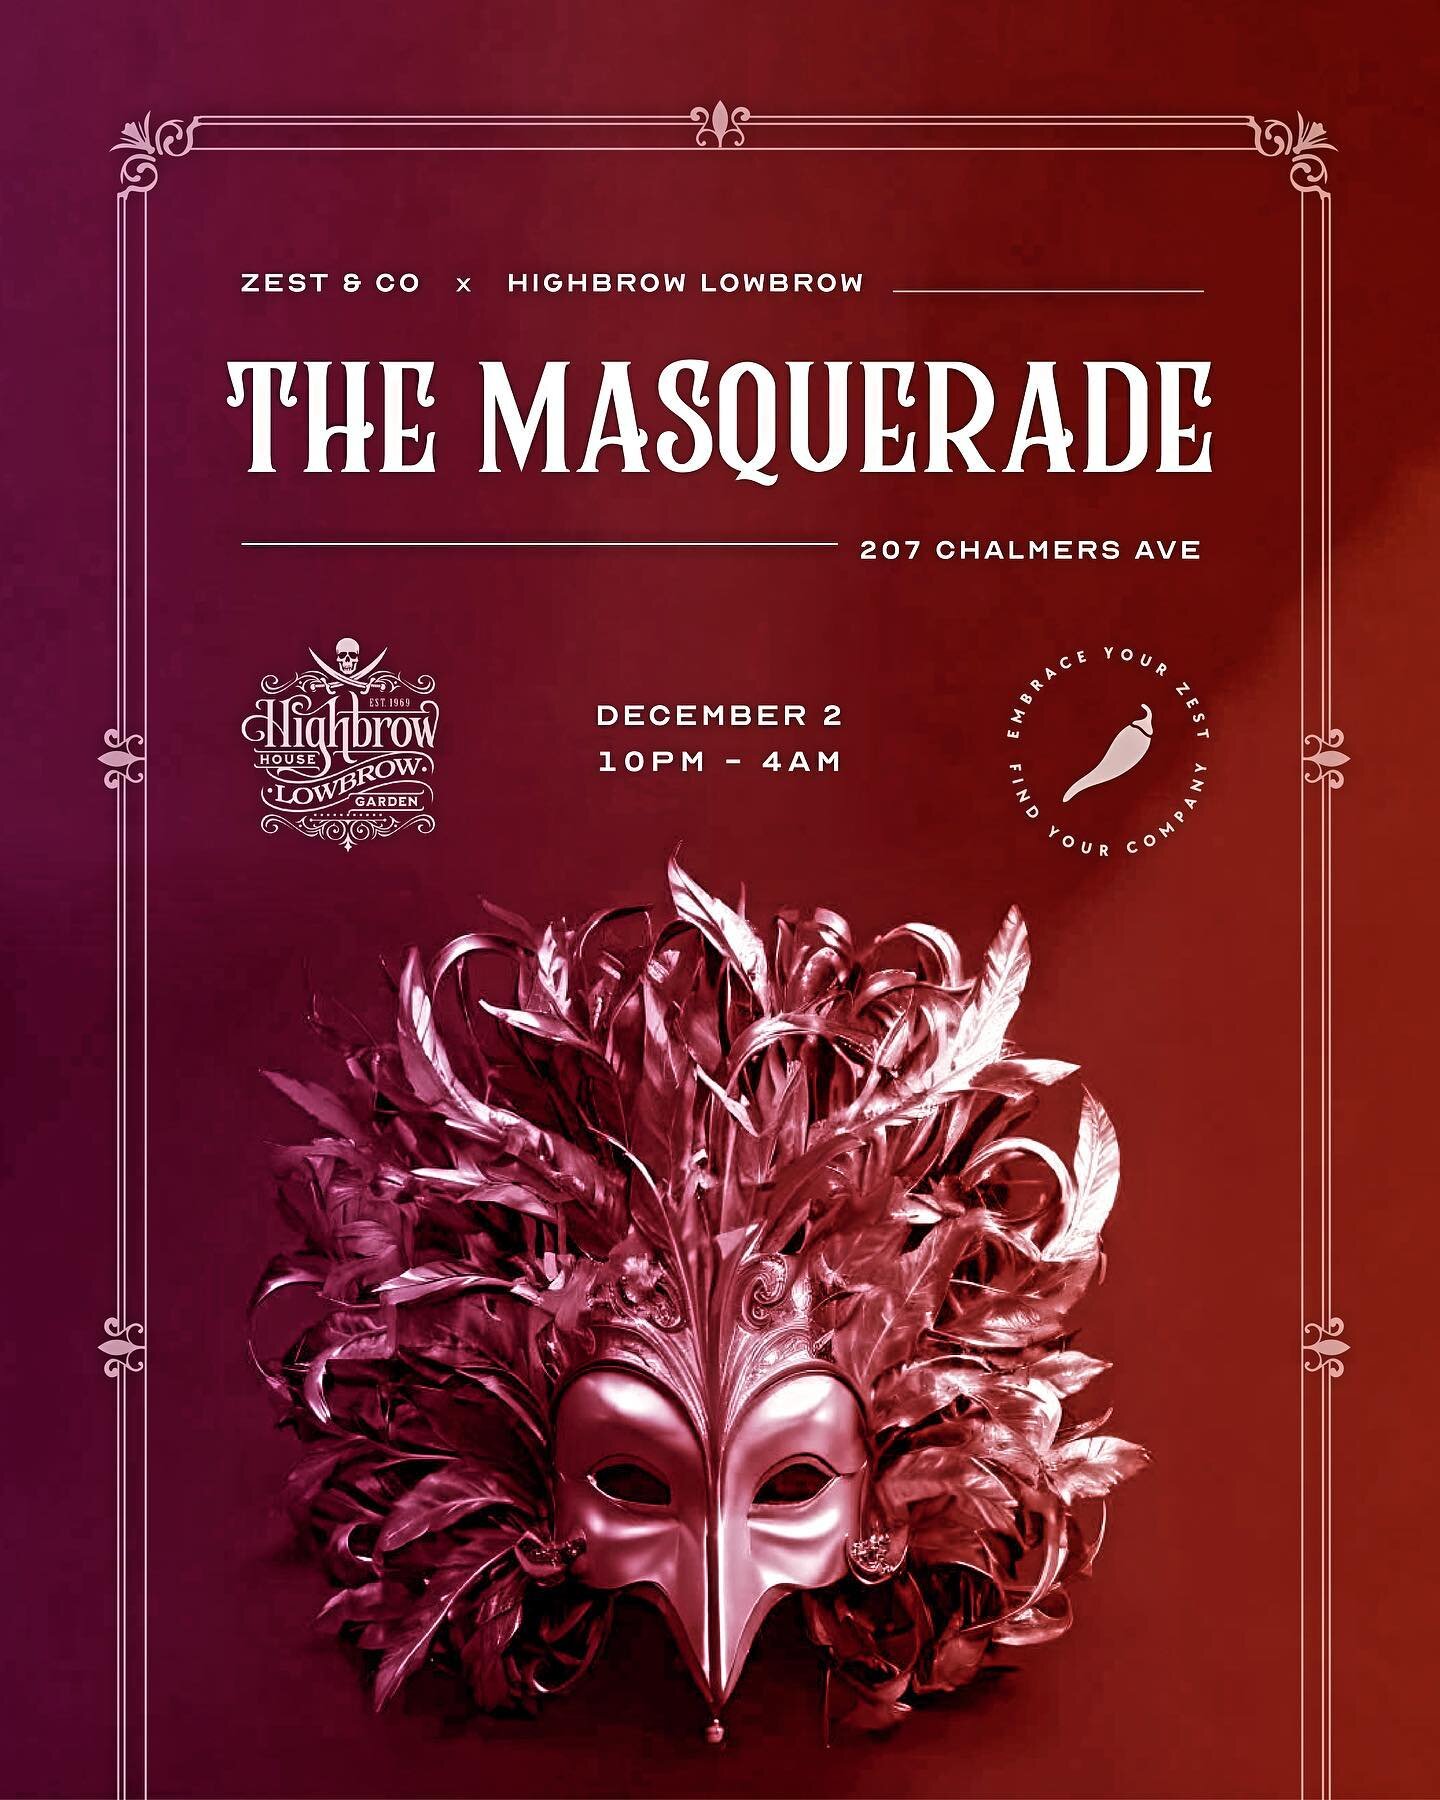 Our final party of 2023 is LIVE and we&rsquo;re so stoked to close out our 1st year with all of y&rsquo;all!!

The Masquerade will be a formal, mask-required party where chic sophistication meets a classic throw down banger. And we&rsquo;re teaming u